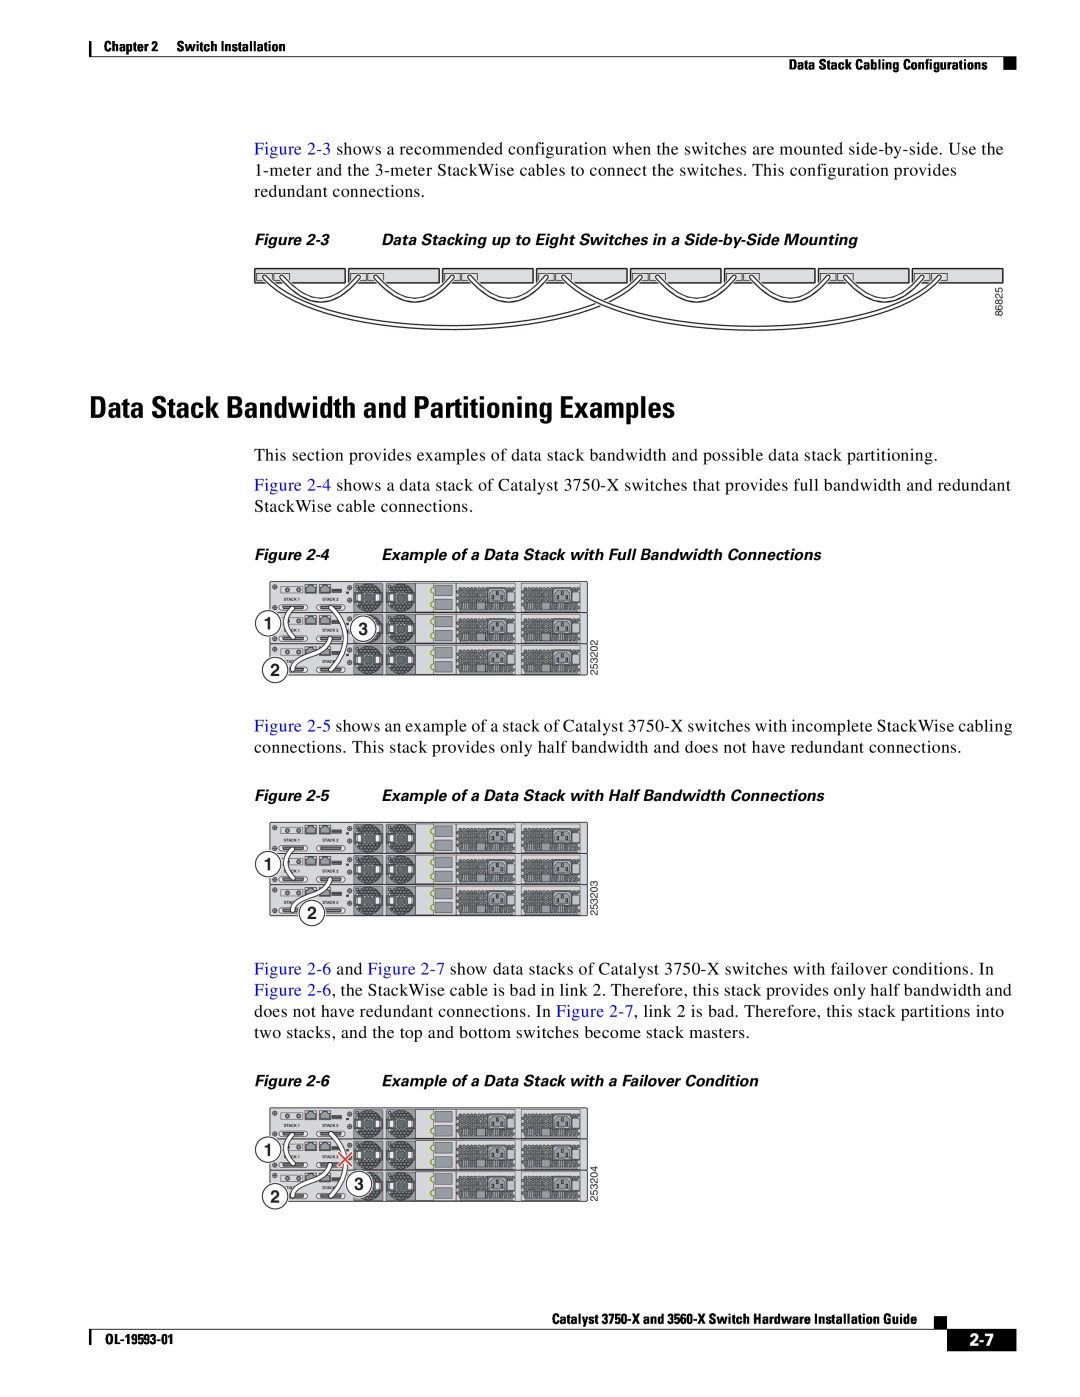 Cisco Systems 3560-X Data Stack Bandwidth and Partitioning Examples, 6 Example of a Data Stack with a Failover Condition 